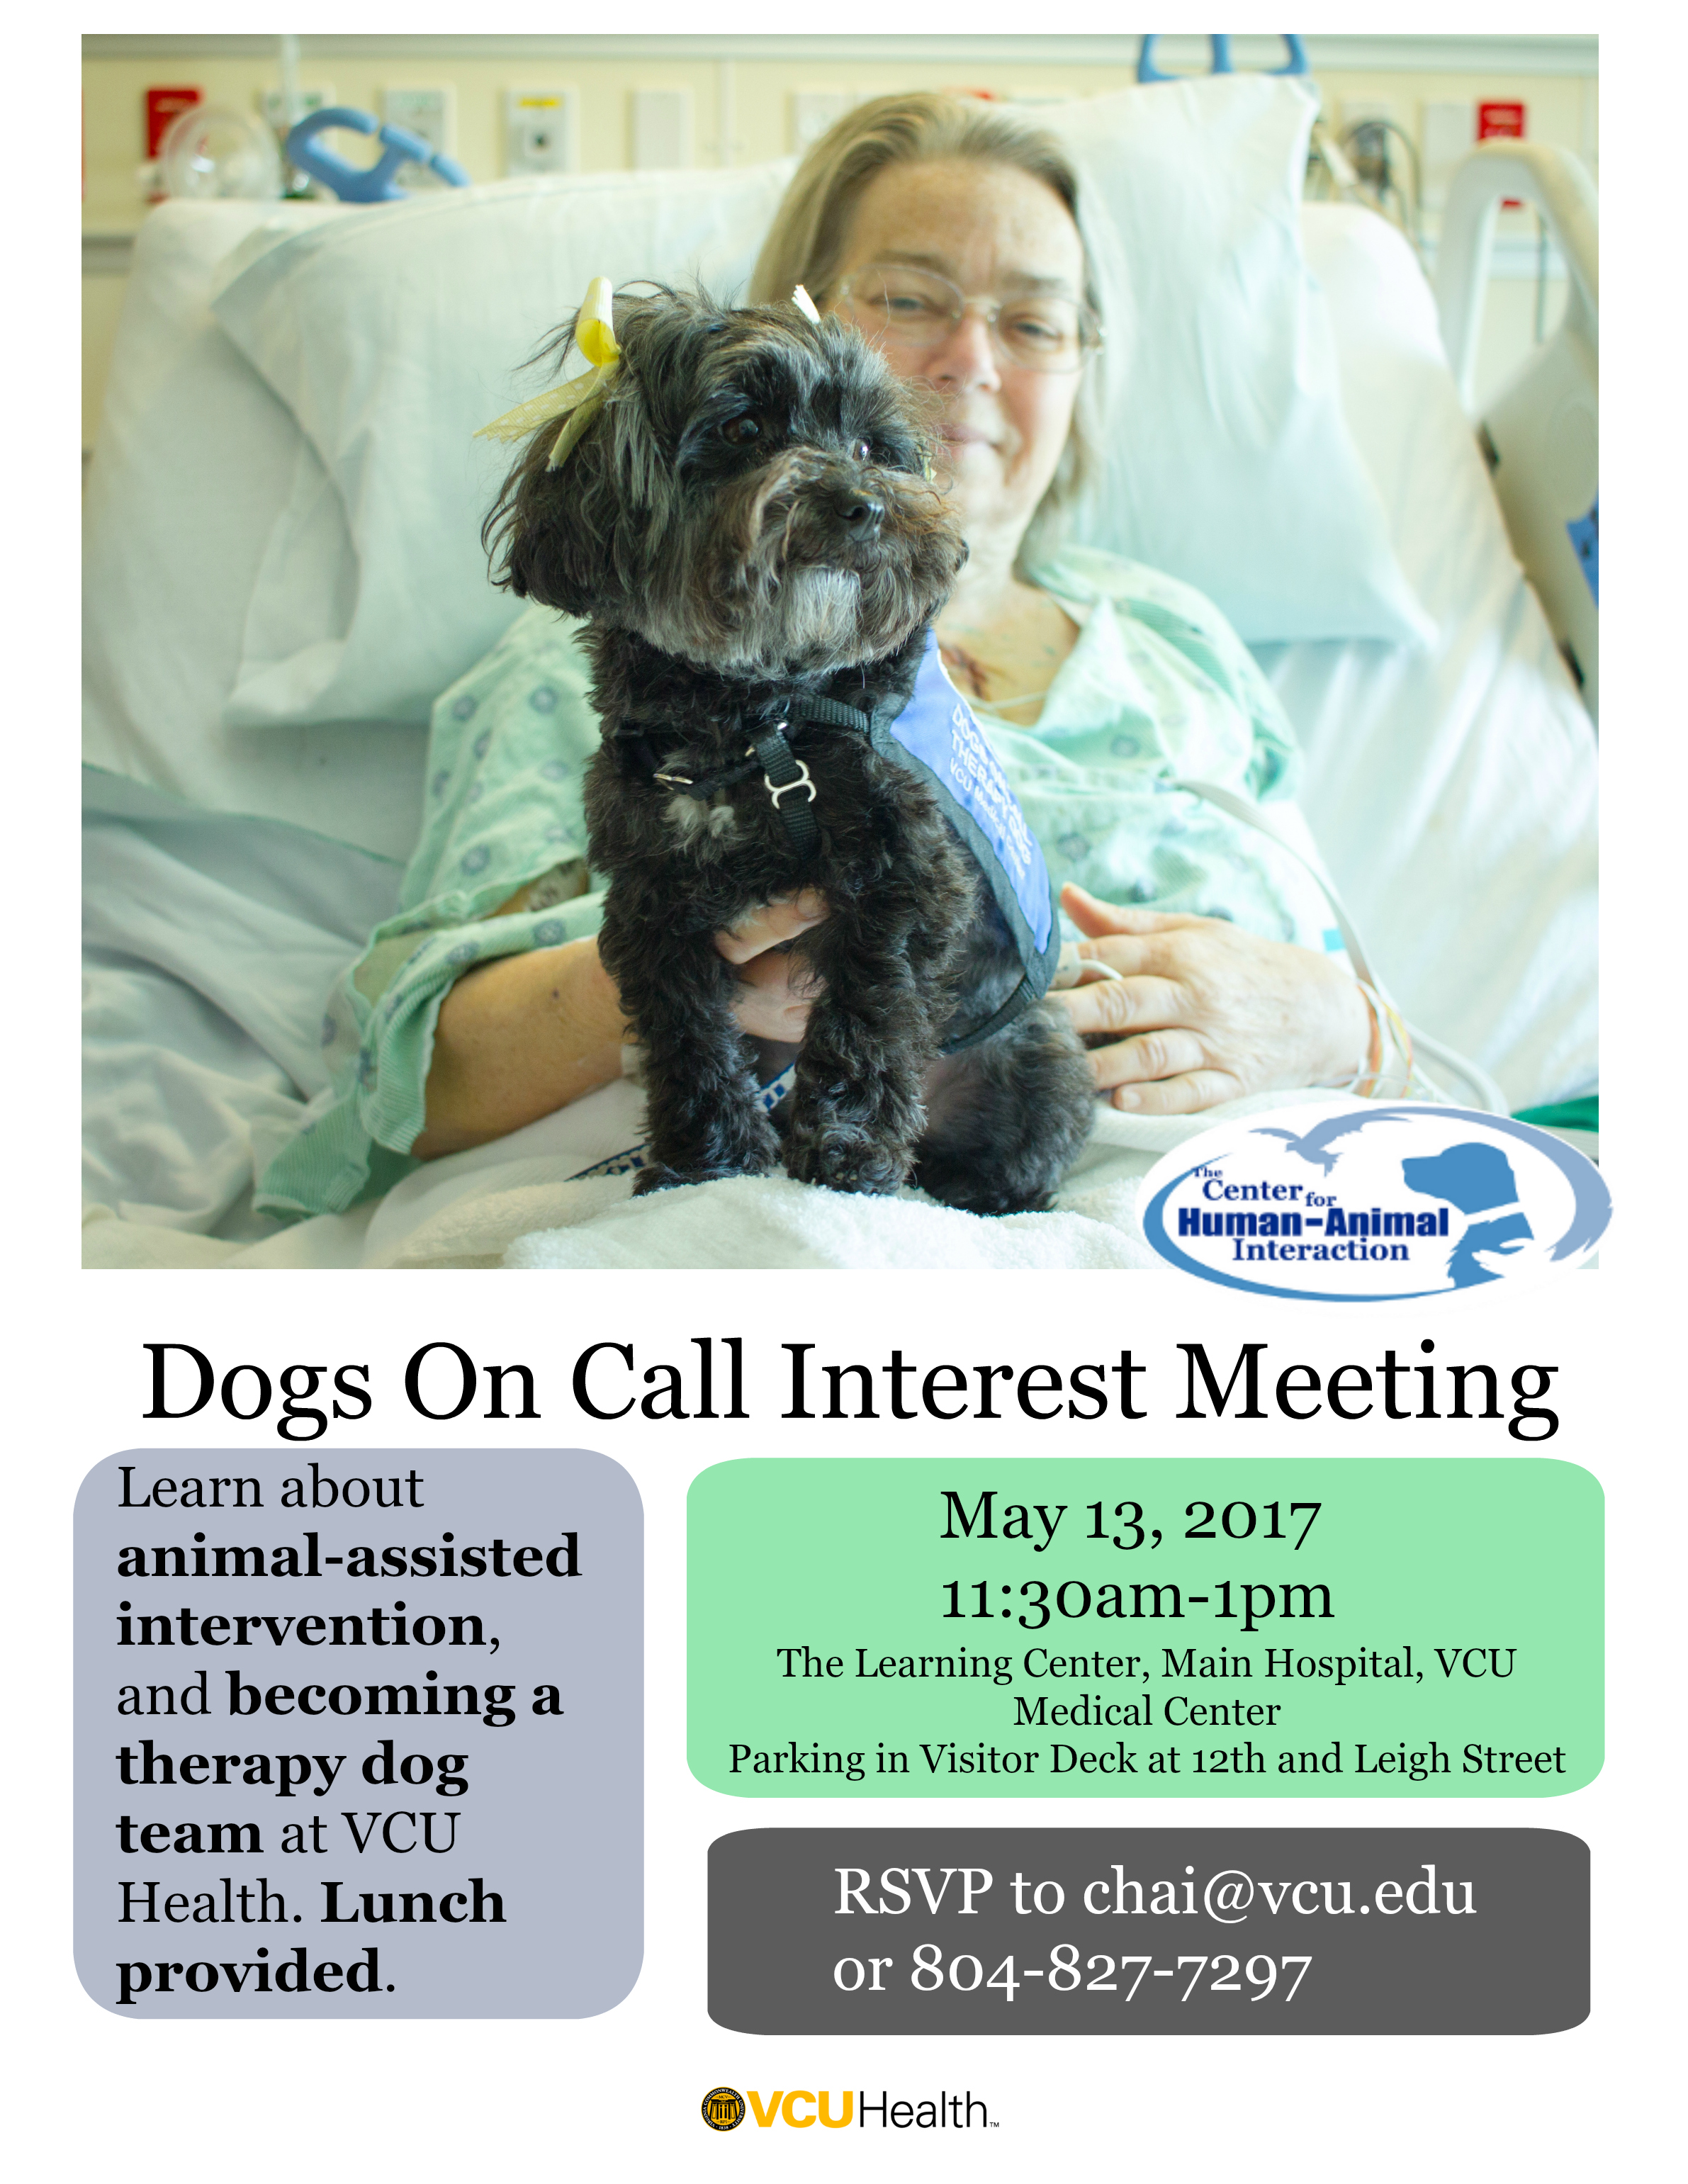 Dogs On Call therapy dog Phoebe, a maltipoo, sits on the lap of a patient in bed.Text: Dogs On Call Interest Meeting. Learning about animal-assisted intervention, and becoming a therapy dog team at VCU Health. Lunch provided. May 13, 2017, 11:30am-1pm. At The Learning Center, Main Hospital, VCU Medical Center. Parking in Visitor Deck at 12th and Leigh Streets. RSVP to chai@vcu.edu or 804-827-7297.